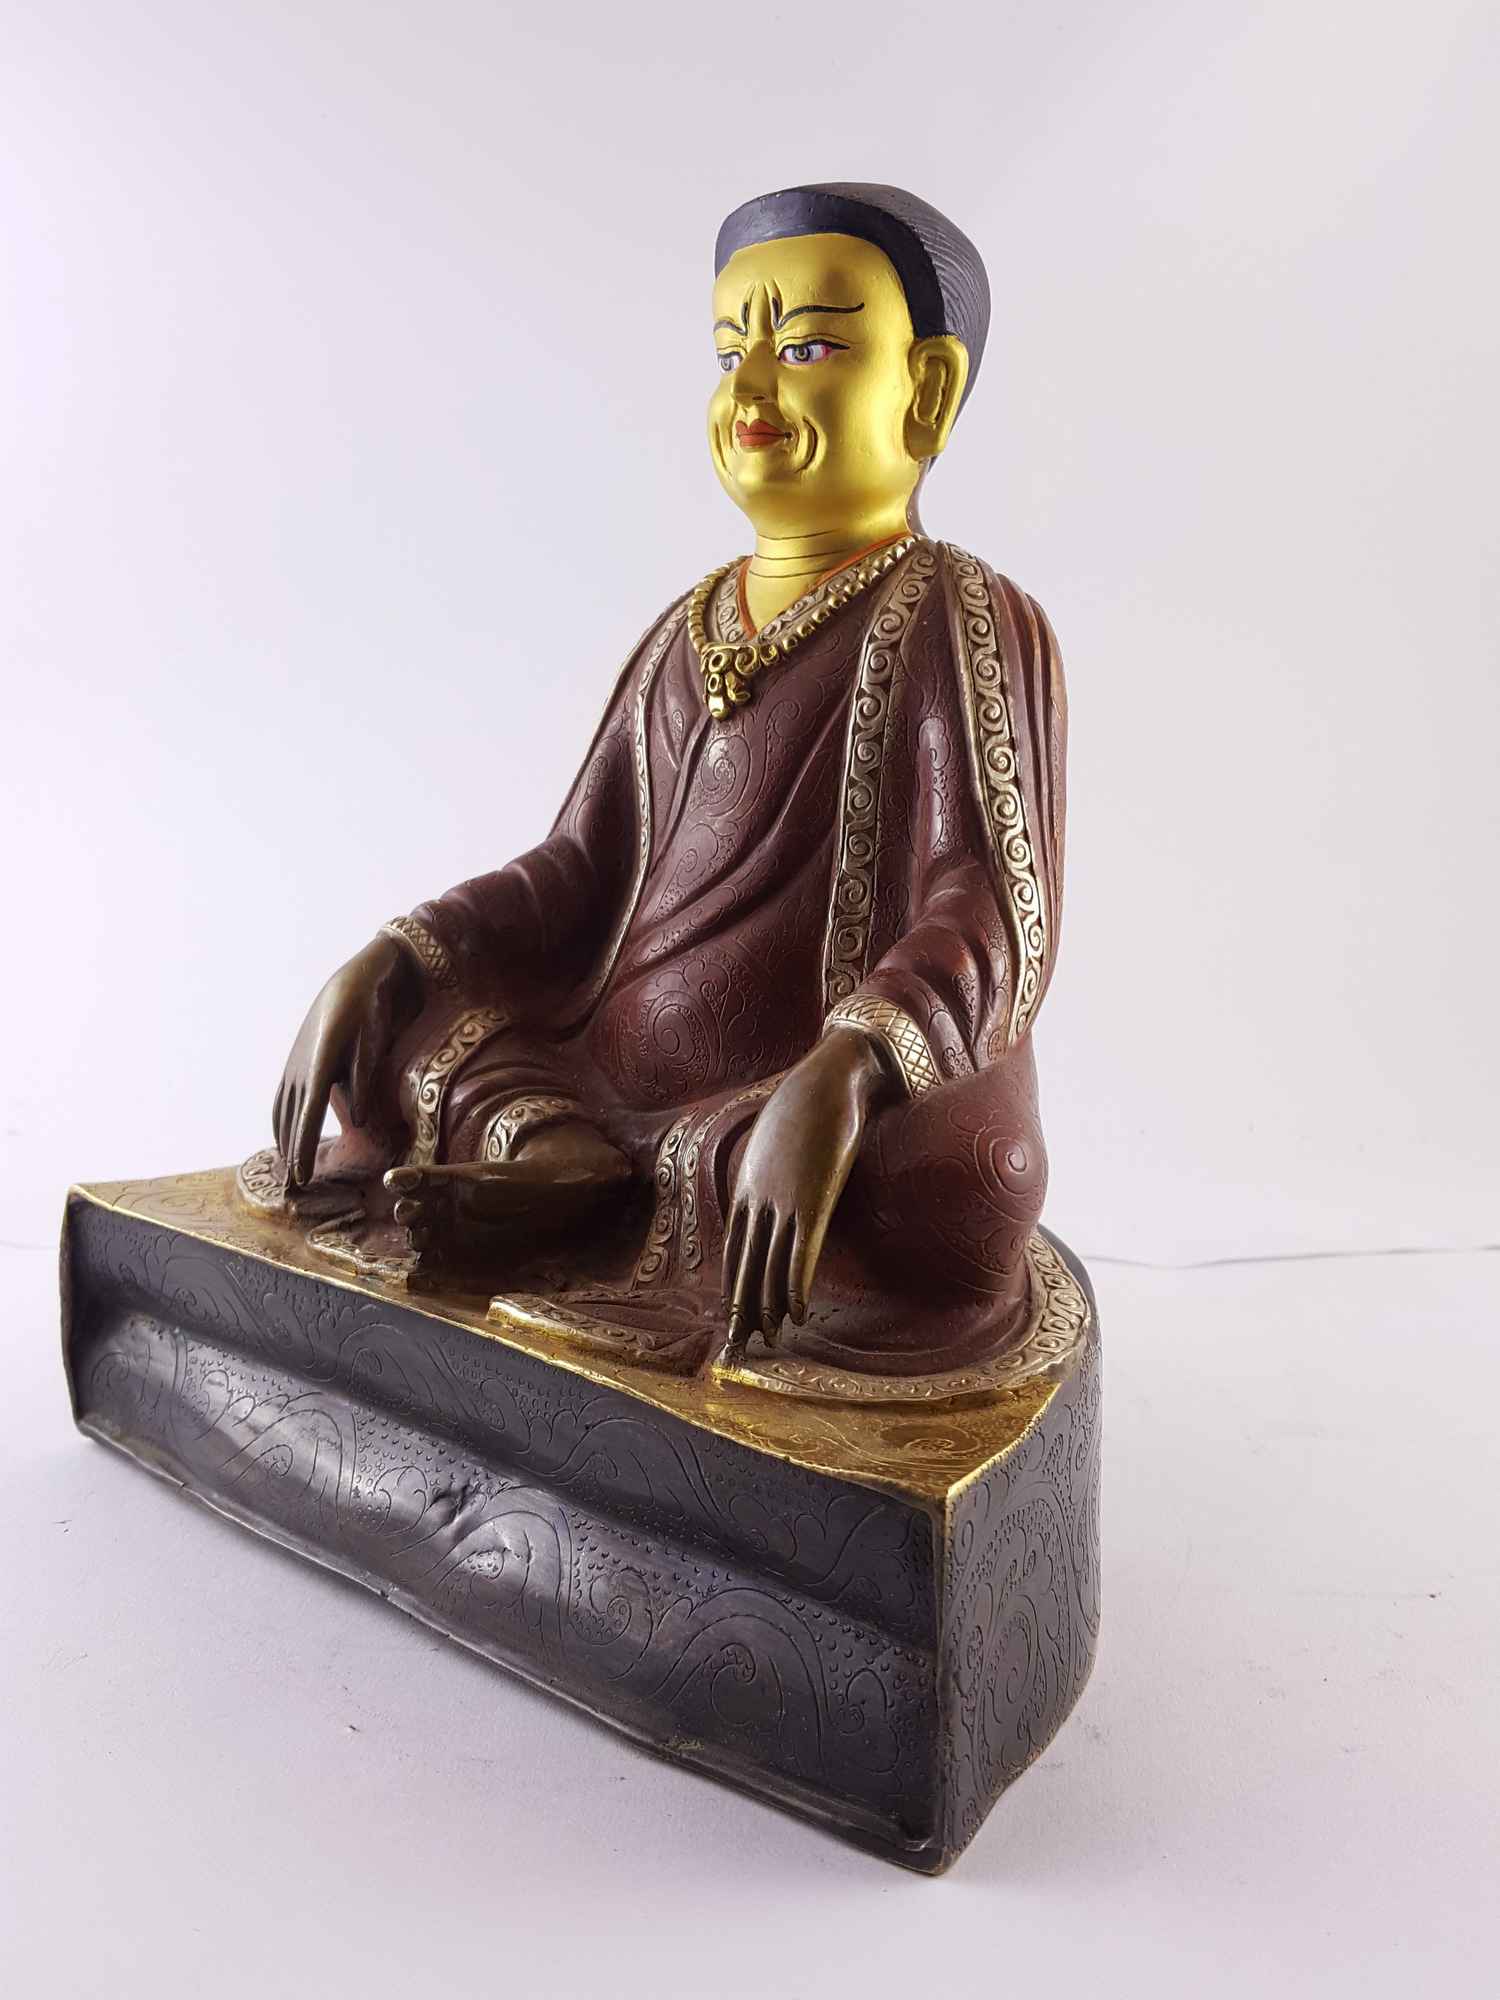 Copper Statue Of Marpa Lotsawa gold And Silver Plated, painted Face, double Color Oxidation